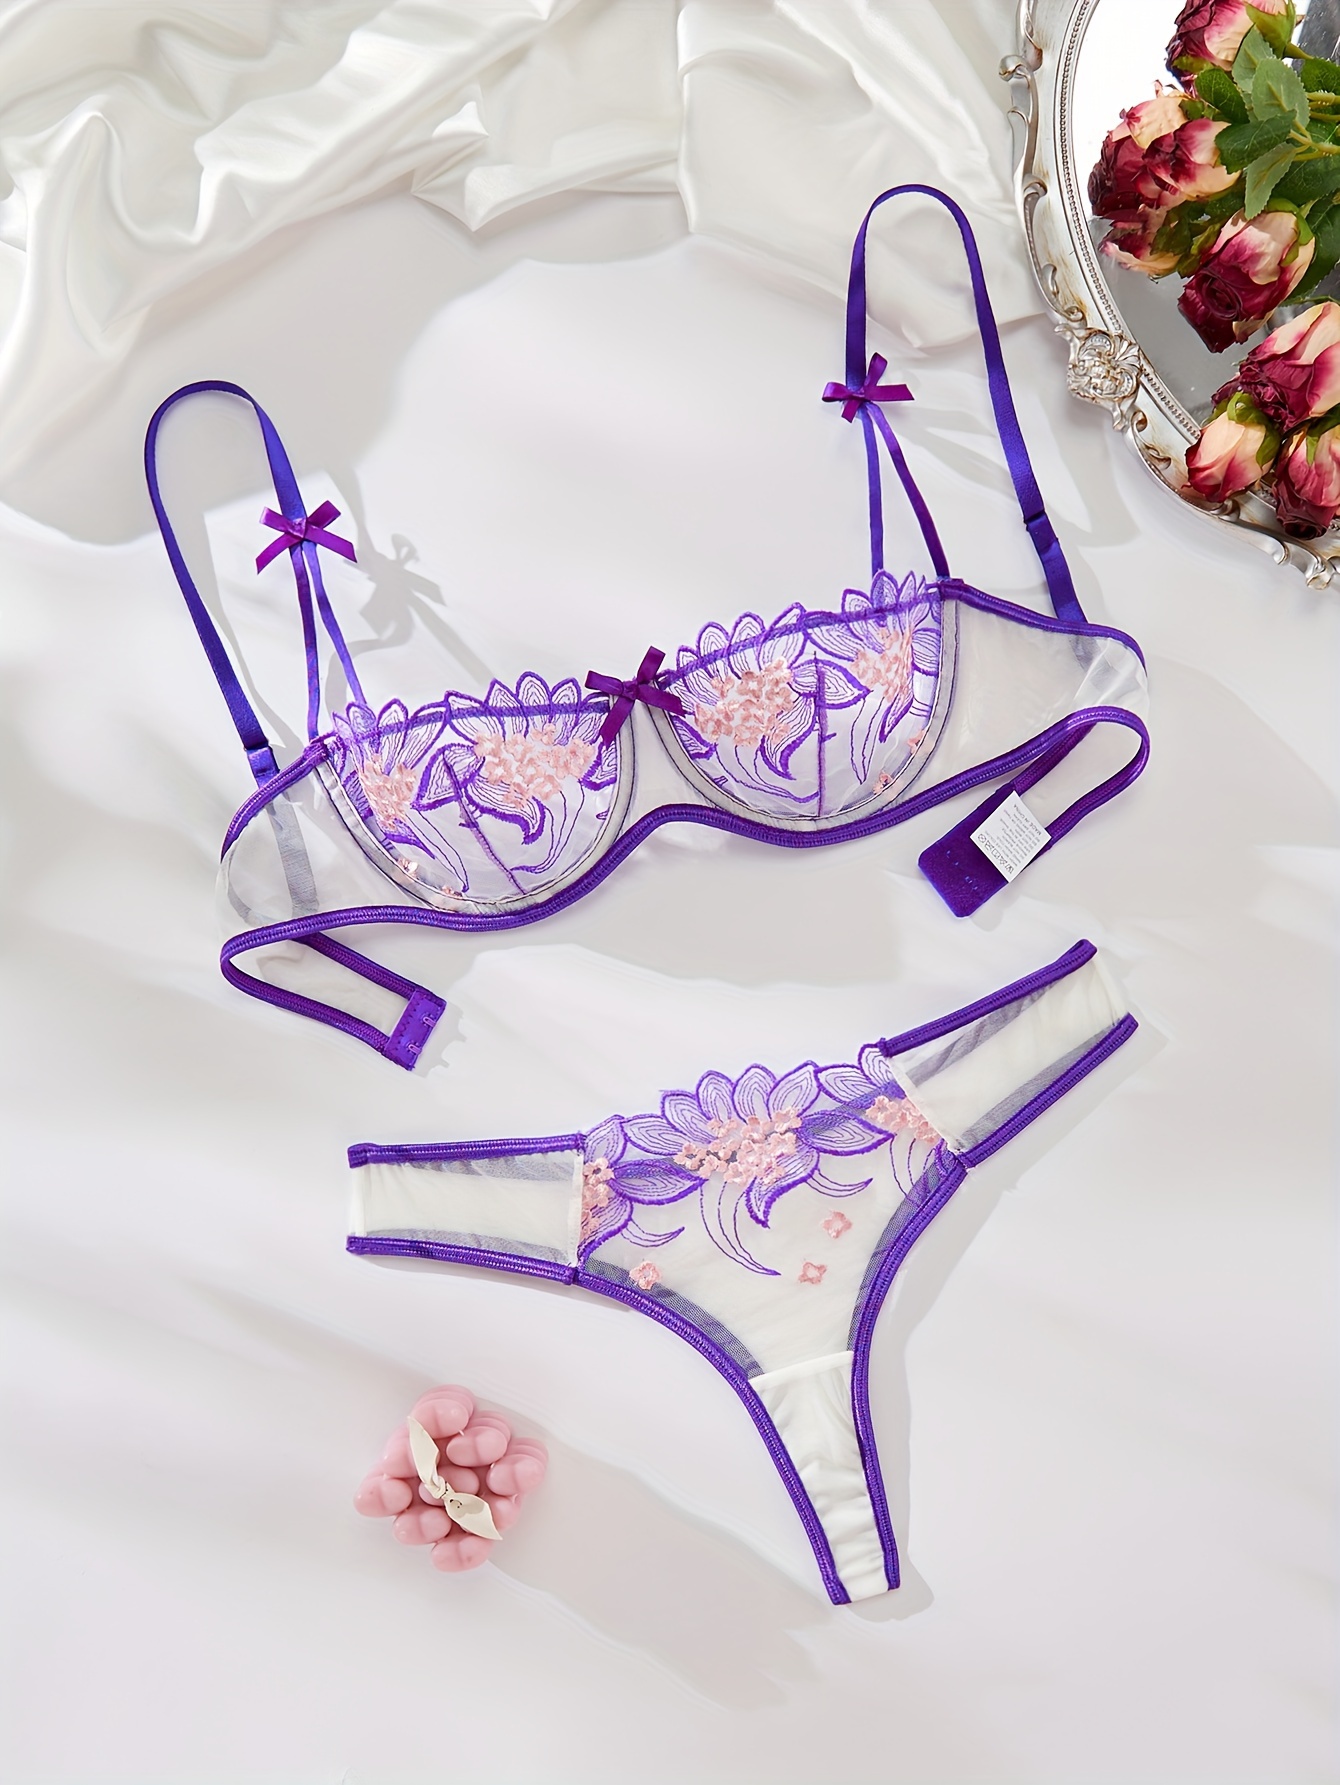 Romantic Floral Embroidery Lingerie Set - Sheer Bra And Mesh Thong